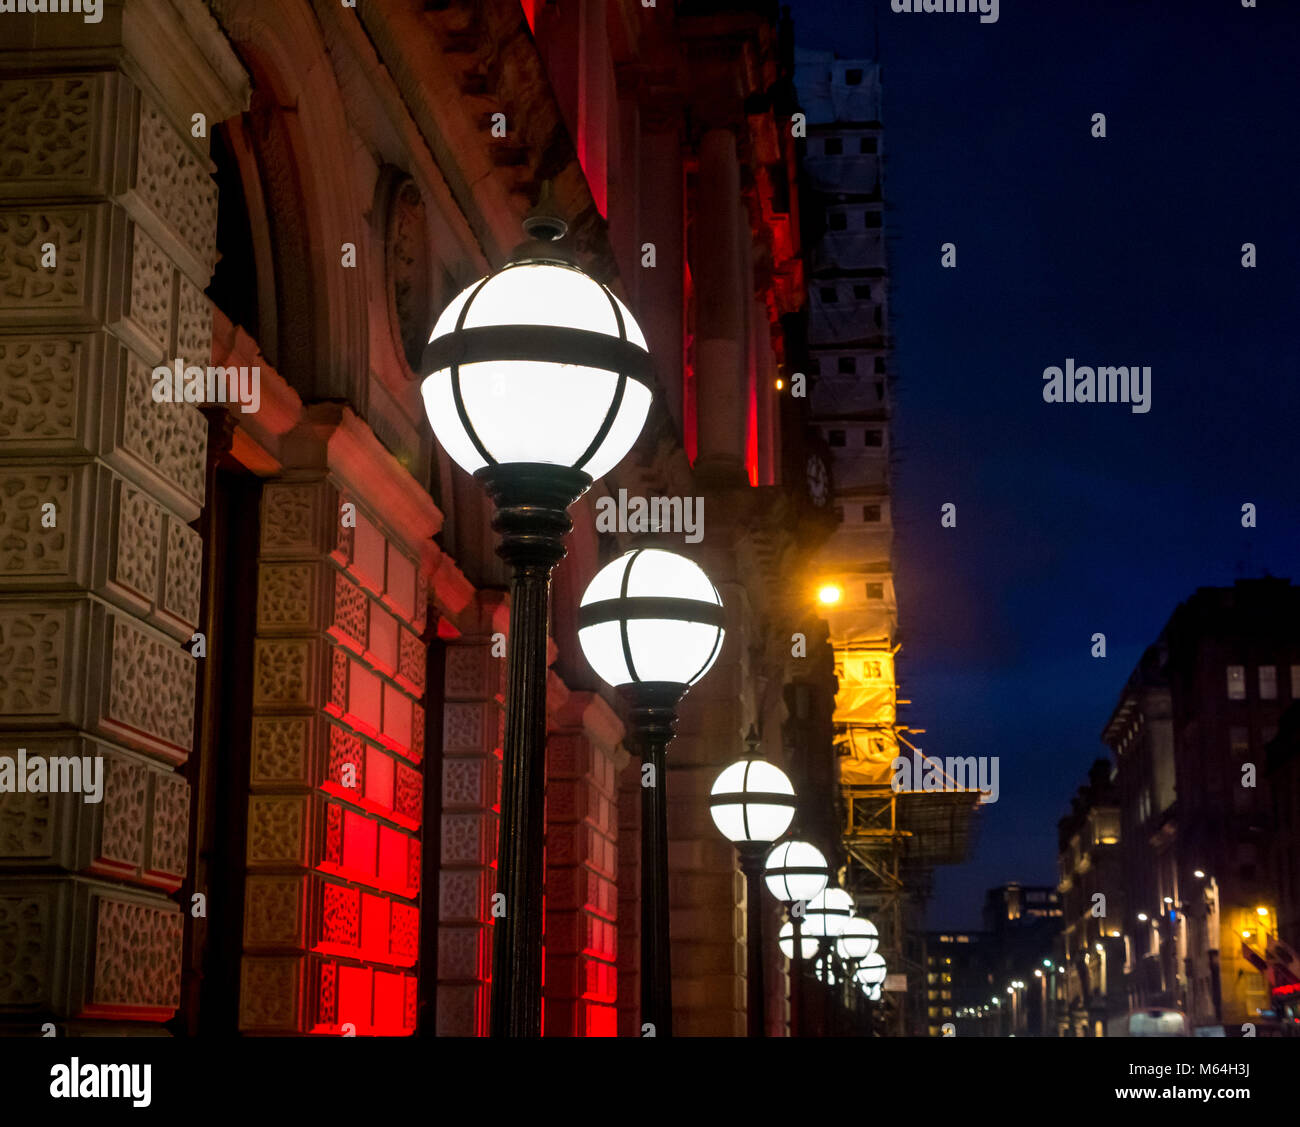 Row of old fashioned round lamps lit up at night, Clydesdale Bank head office, St Vincent Place, Glasgow, Scotland, UK with a dark sky Stock Photo